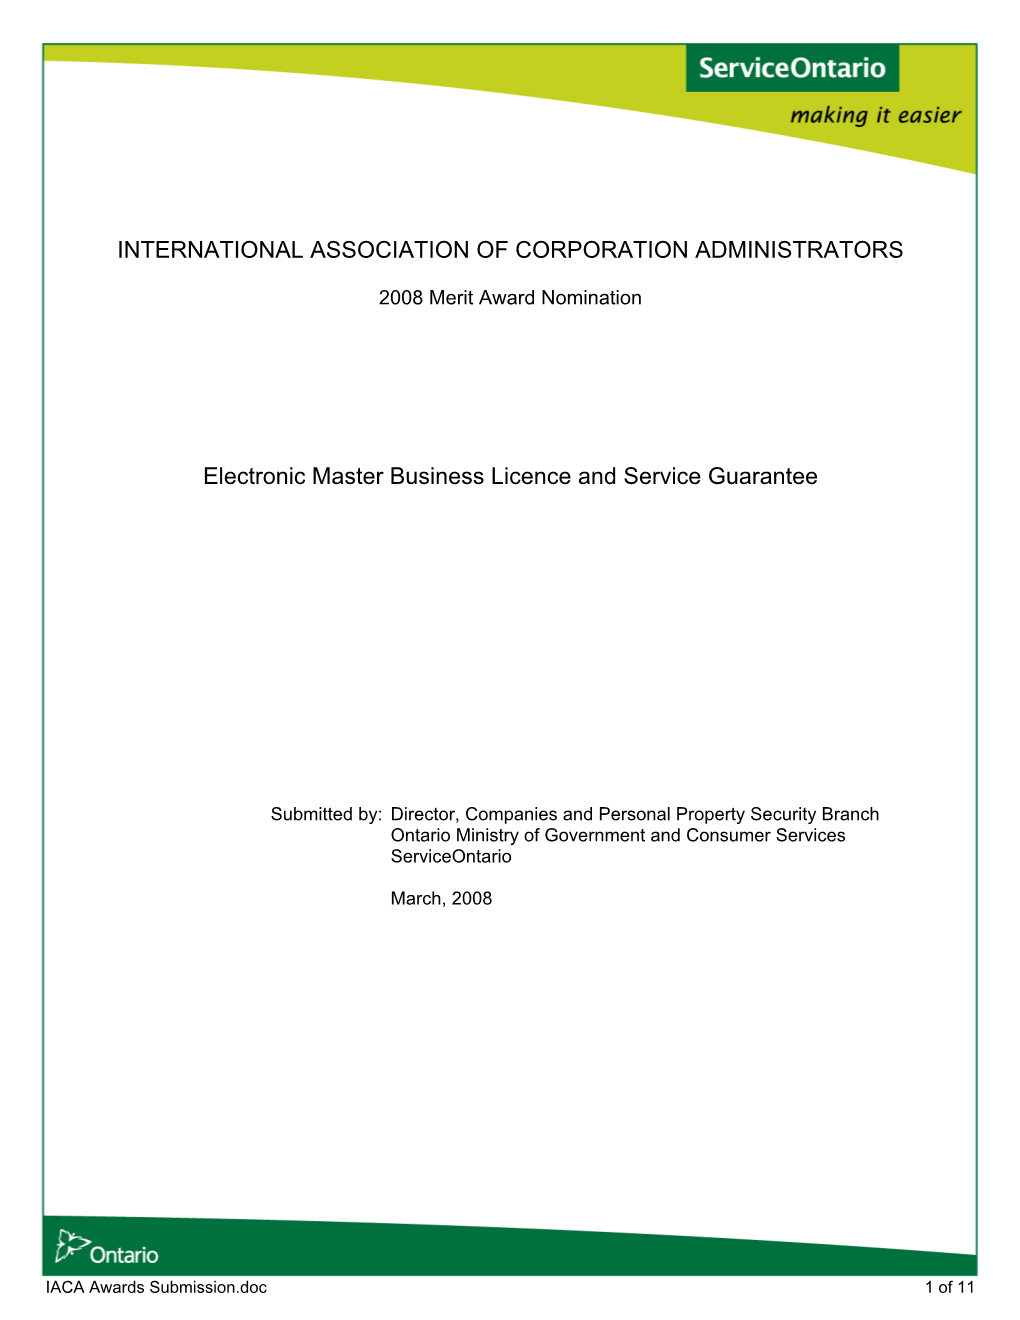 Electronic Master Business Licence and Service Guarantee